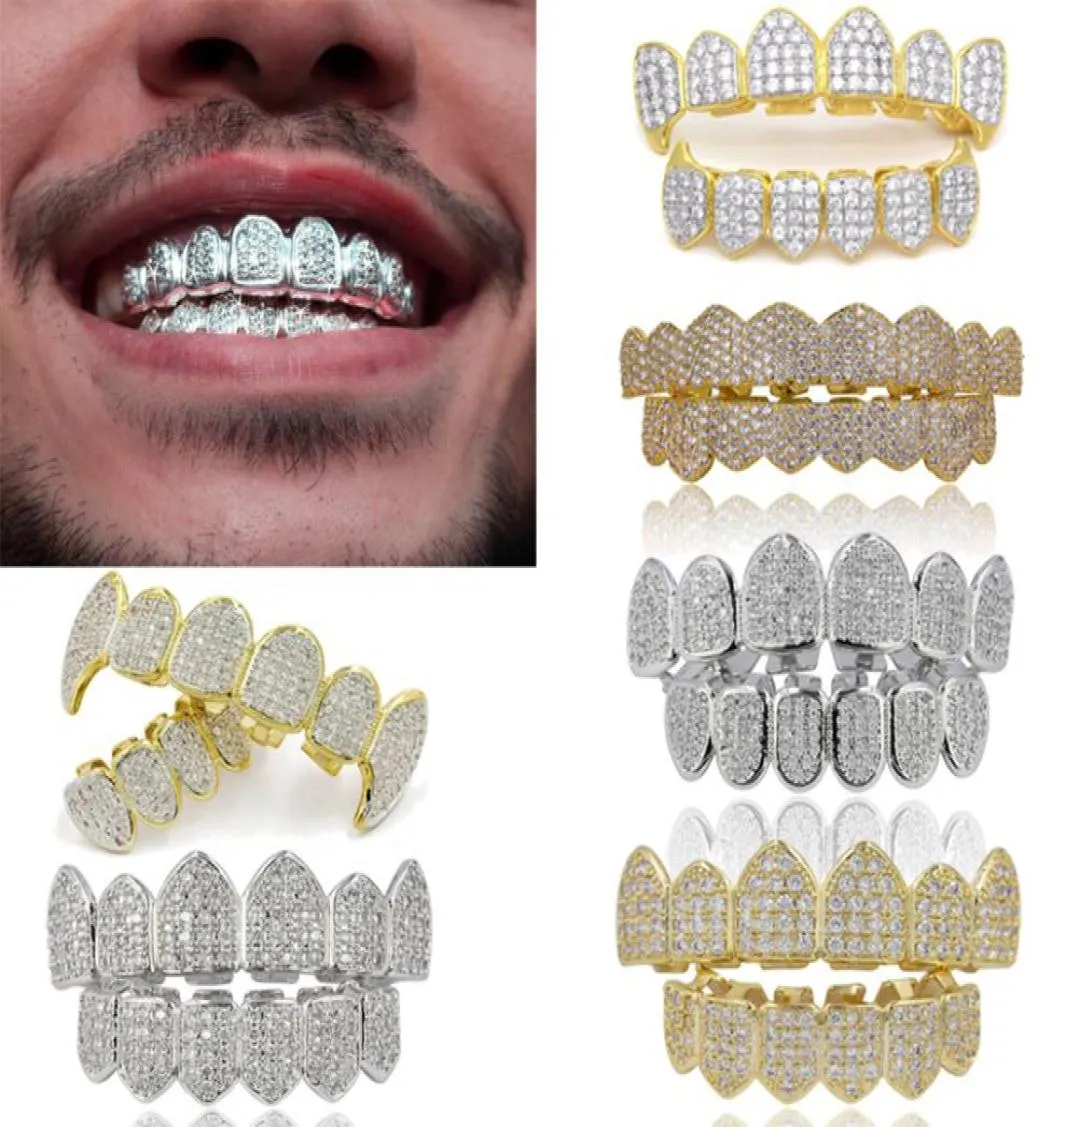 18K Real Gold Punk Hiphop Dental Mouth Grillz Braces Bling Cubic Zircon Rock Vampire Teeth Fang Grills Braces Tooth Cap Rapper Jew1520841